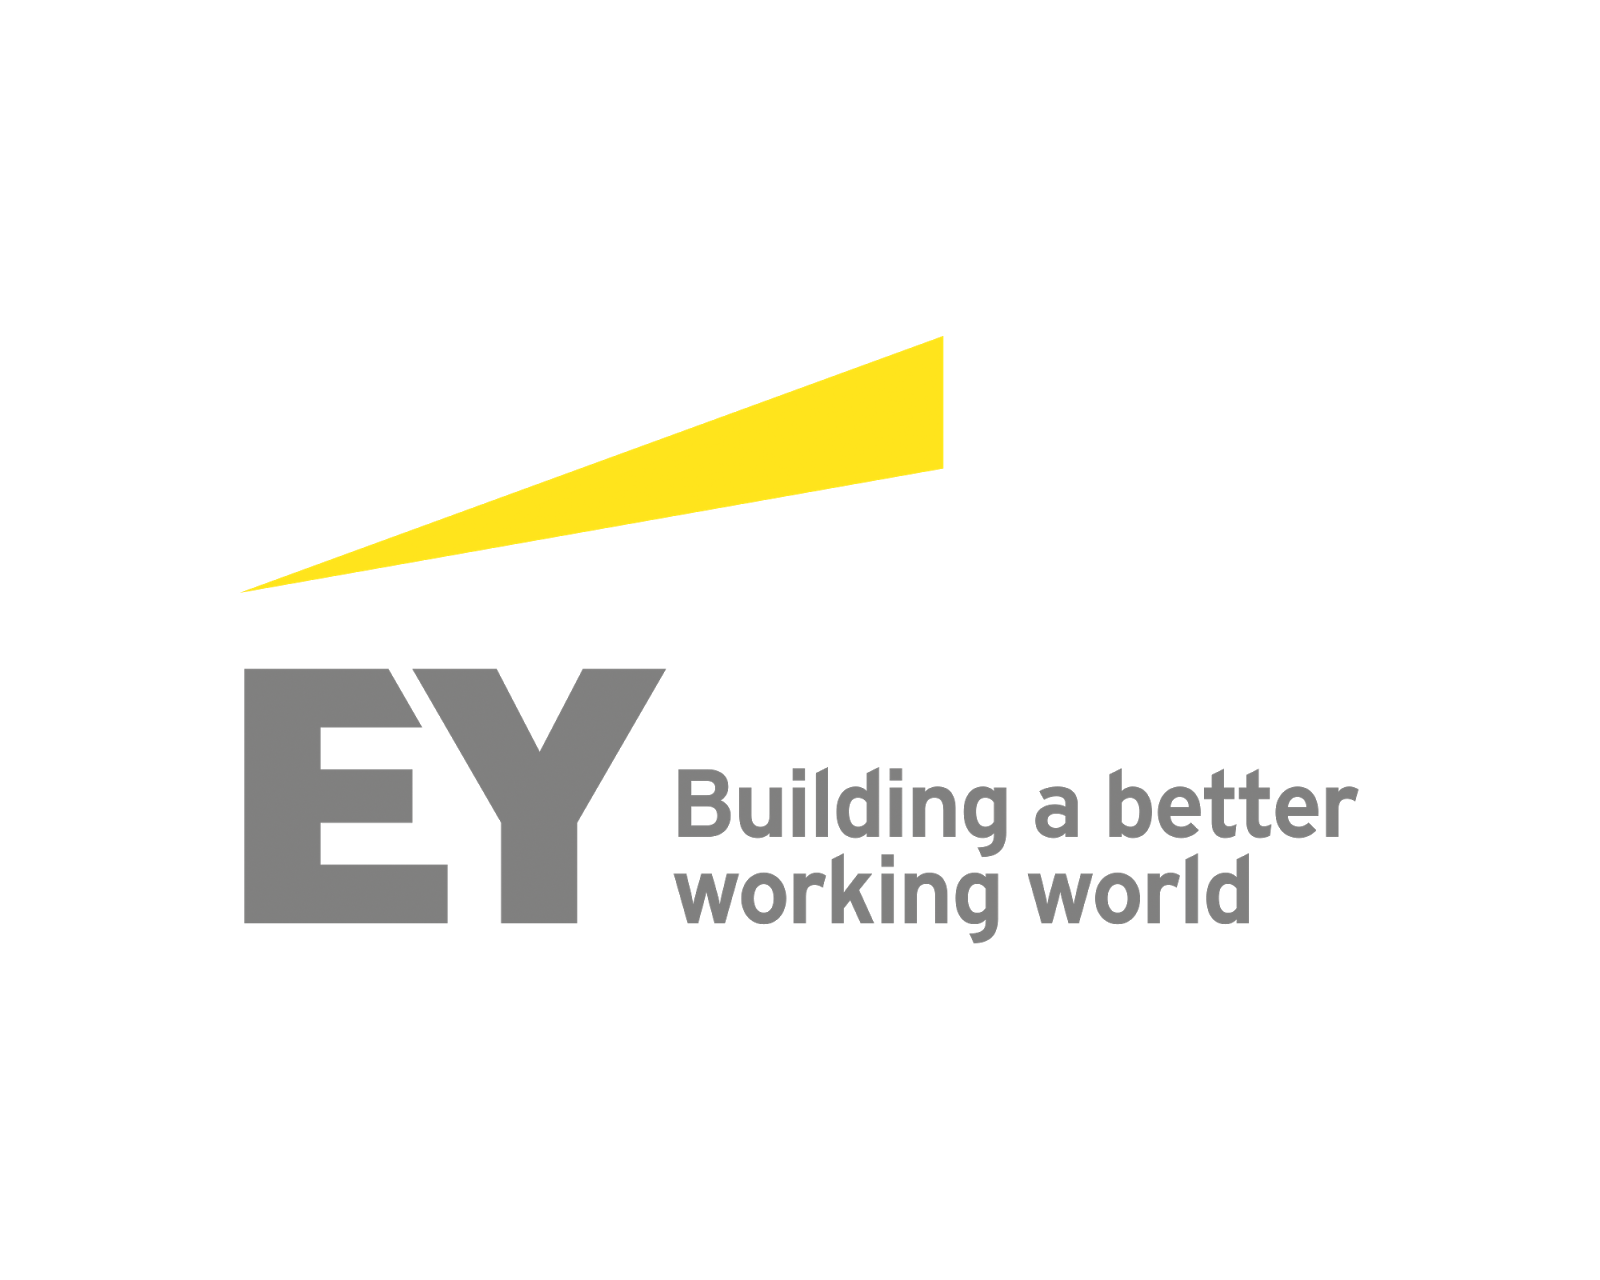 Ey компания. Ernst and young. Ernst and young Россия. Логотип Ernst young новый.